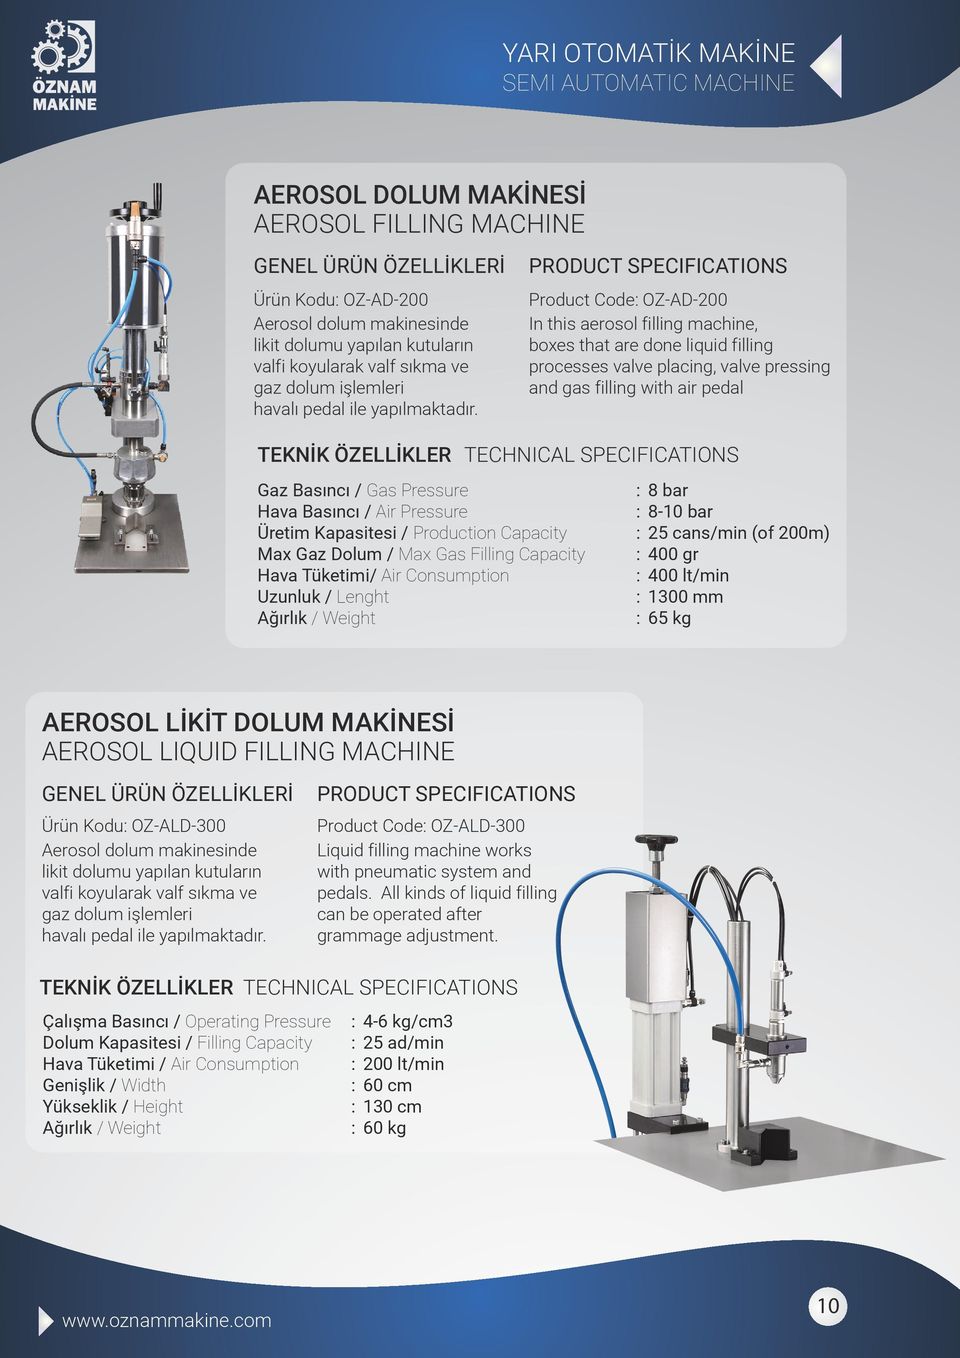 Product Code OZ-AD-200 In this aerosol filling machine, boxes that are done liquid filling processes valve placing, valve pressing and gas filling with air pedal Gaz Basıncı / Gas Pressure Hava